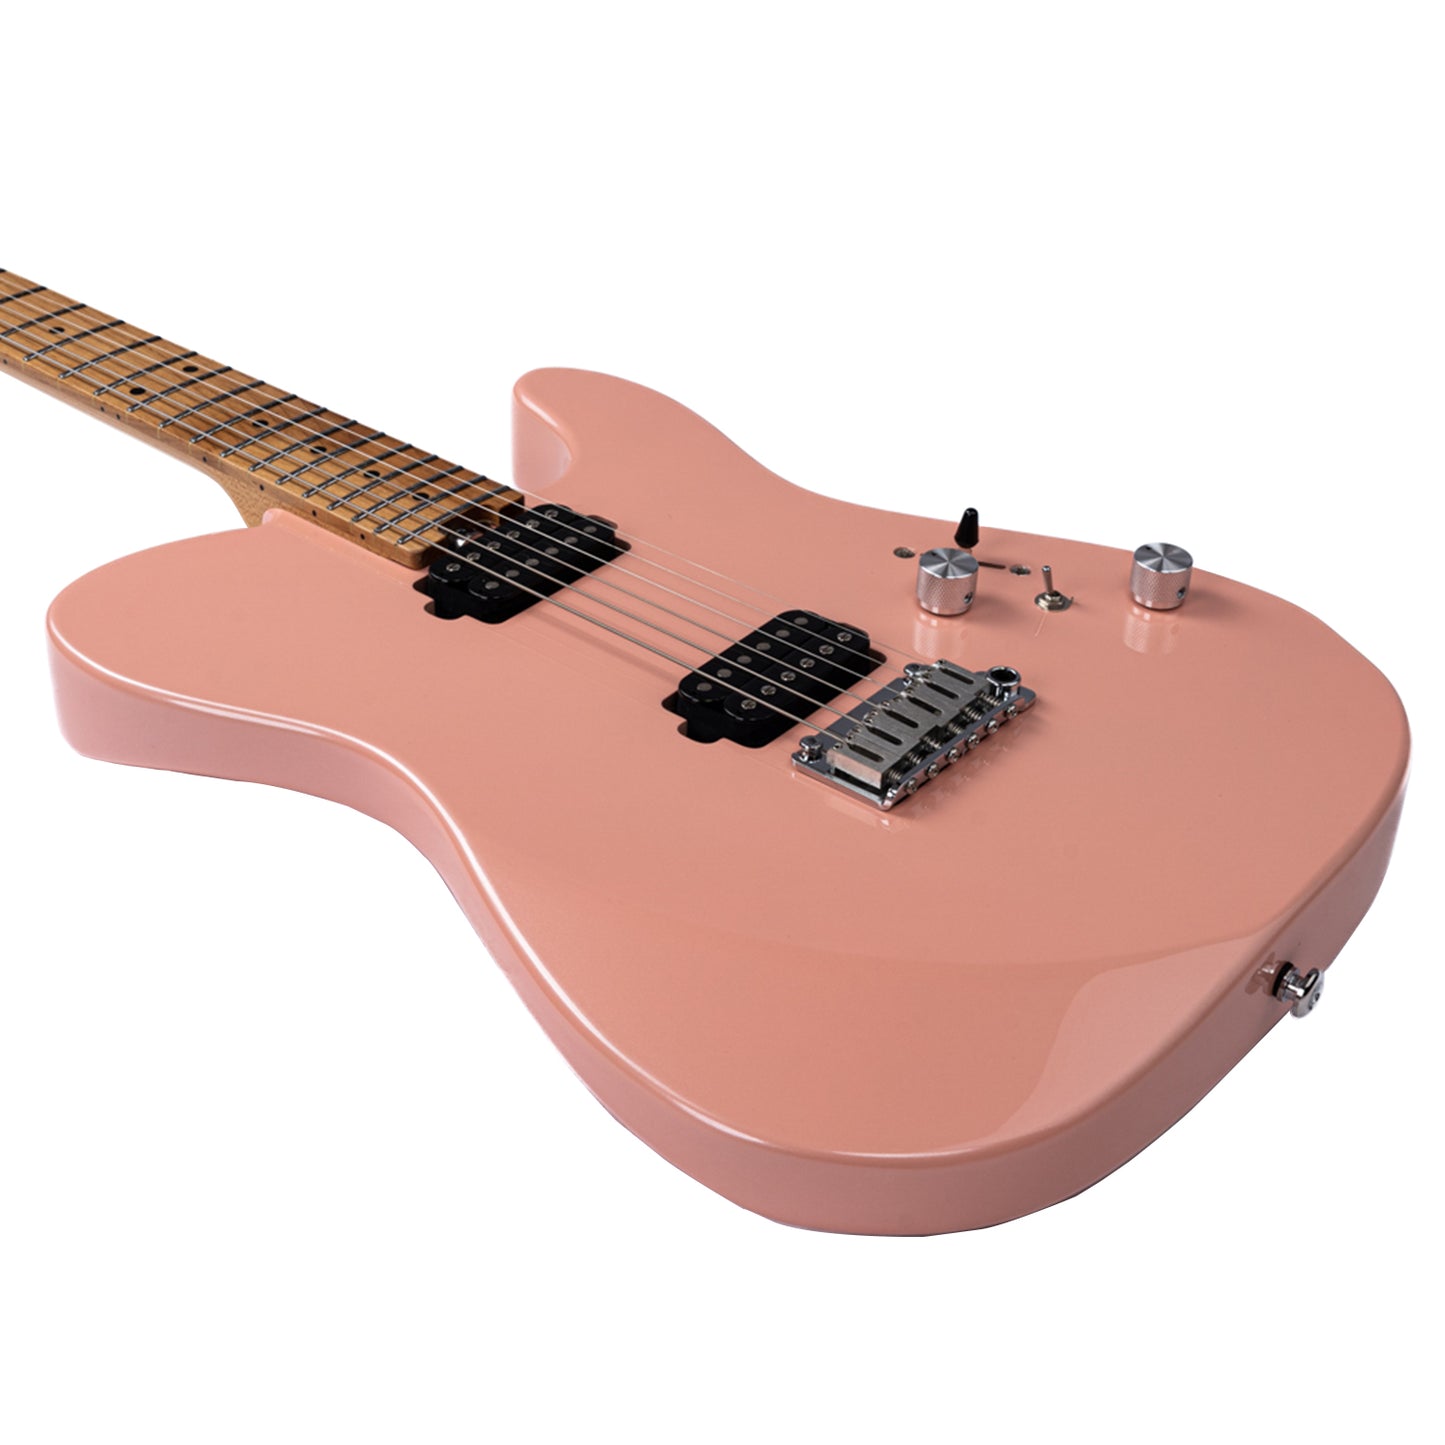 EART electric guitar TL-380 pearl pink